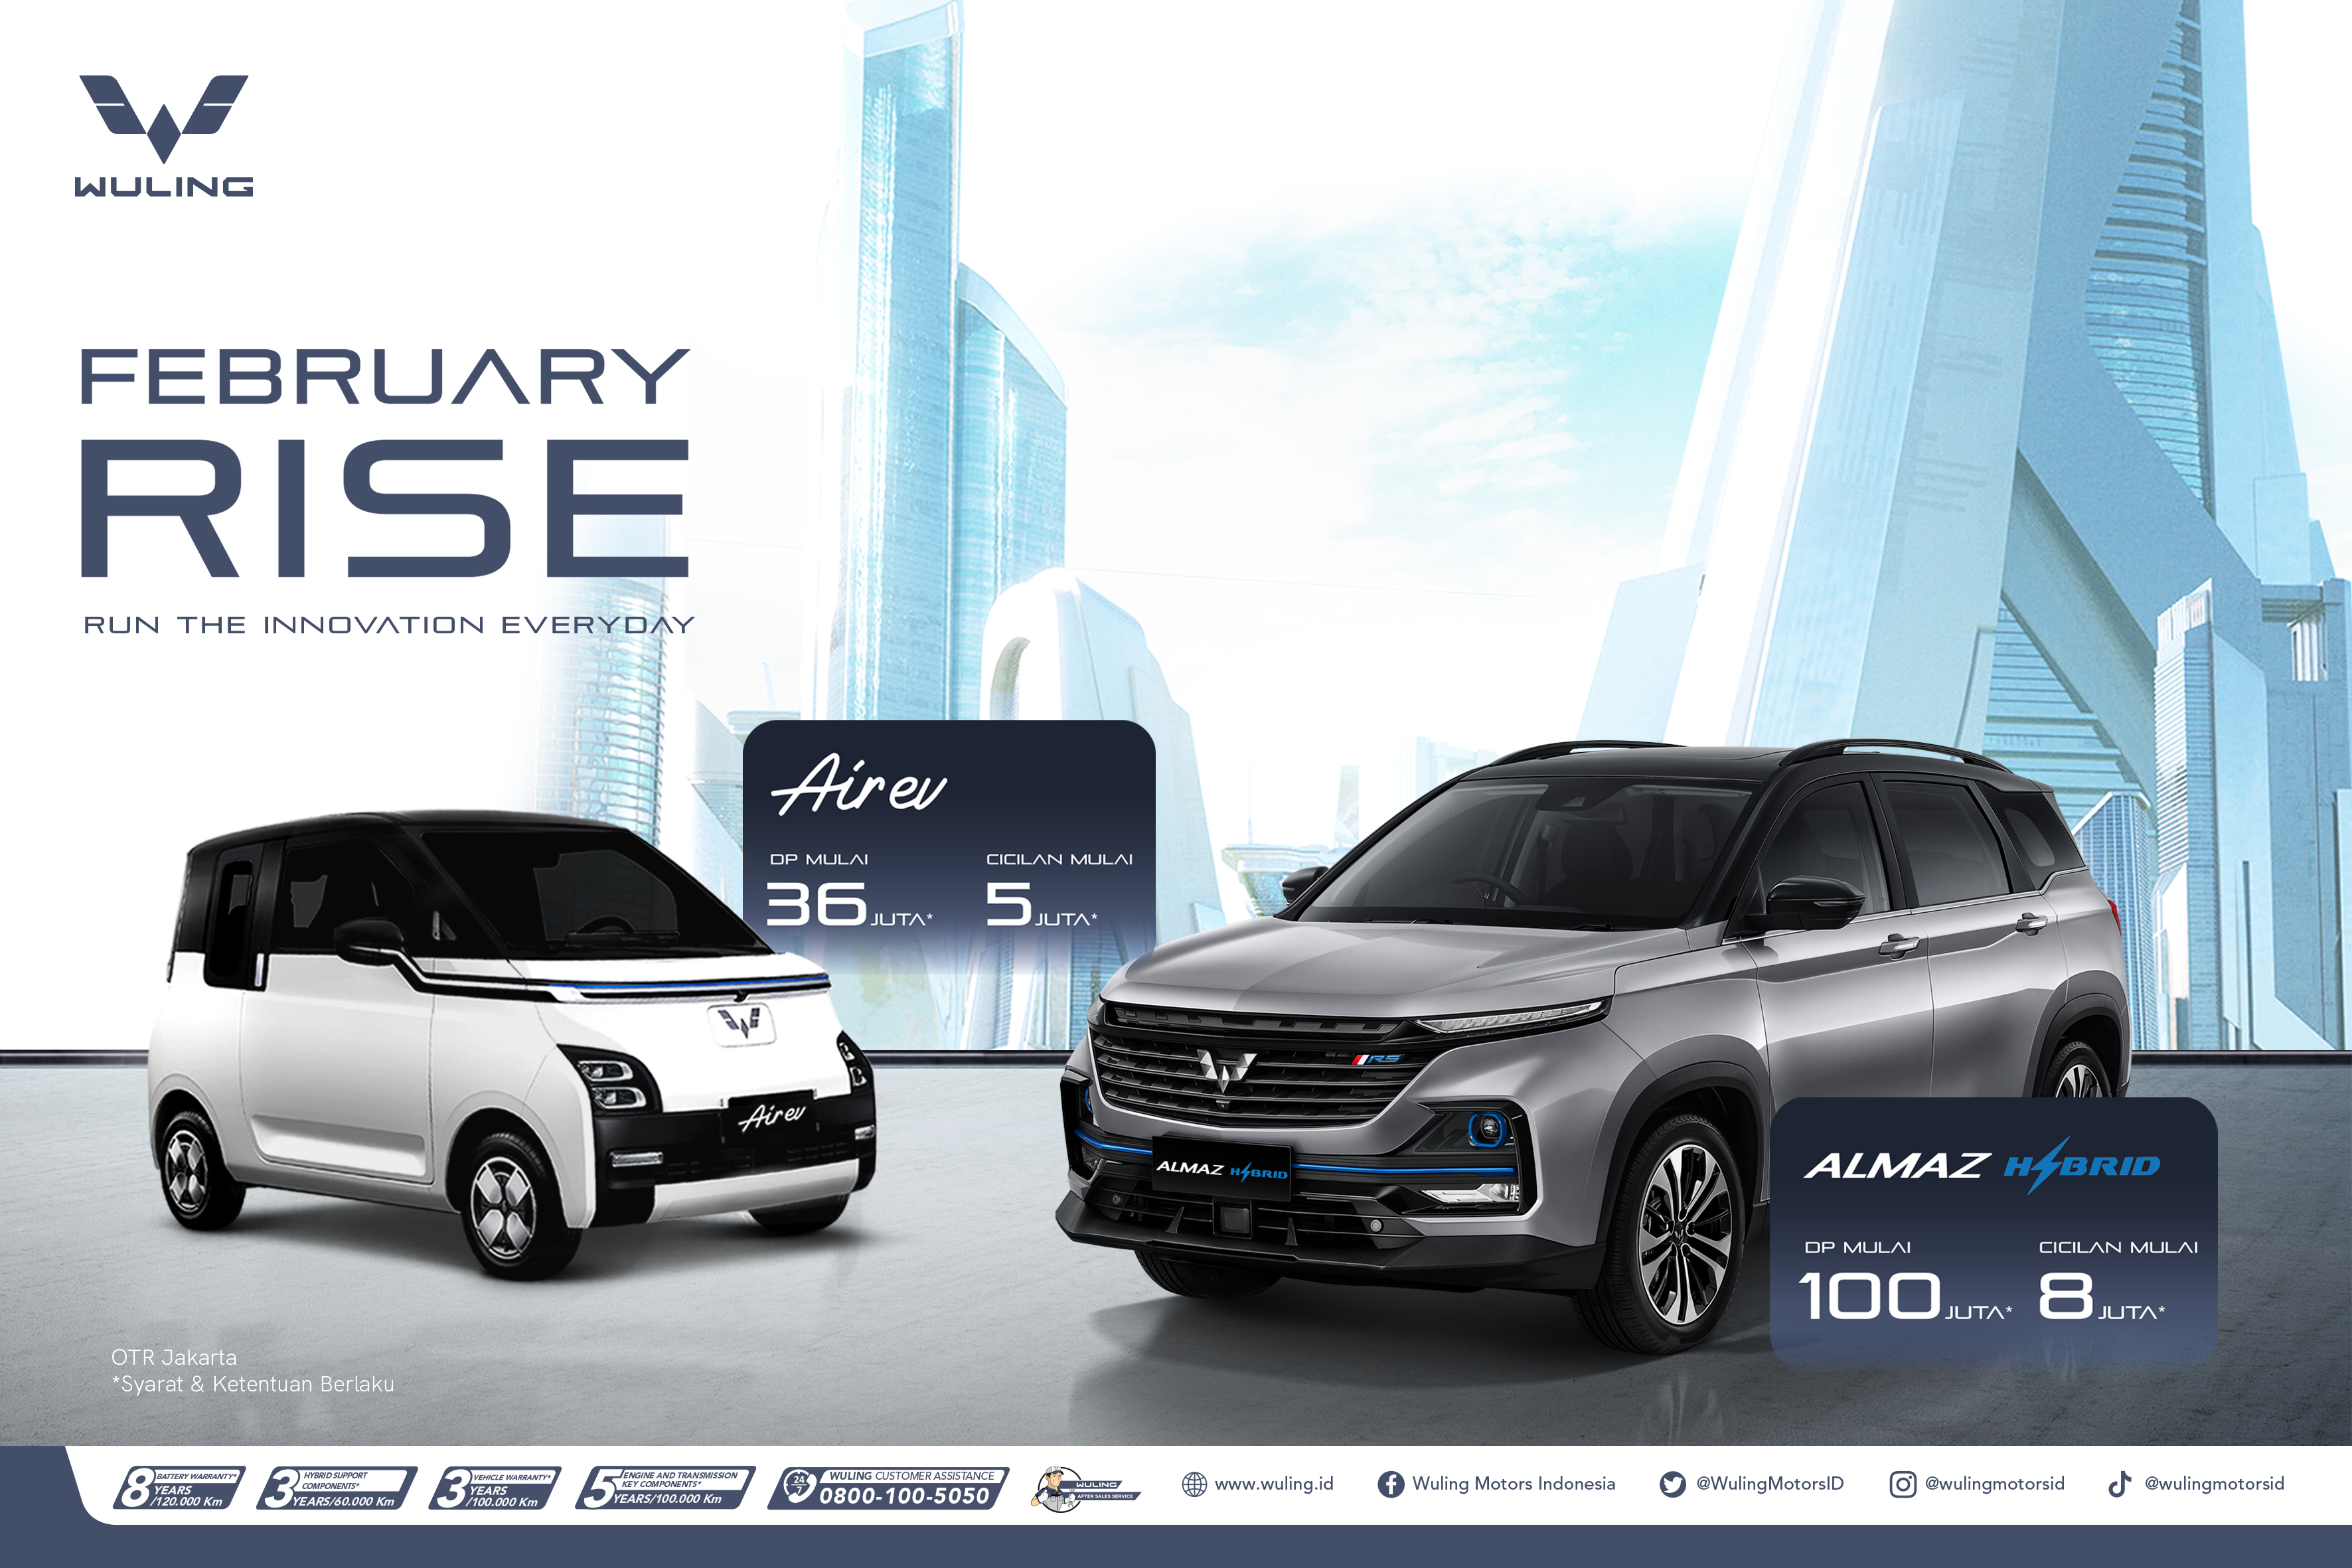 Image Wuling Holds ’February Rise’ Throughout This Month For Various Innovative Product Lines